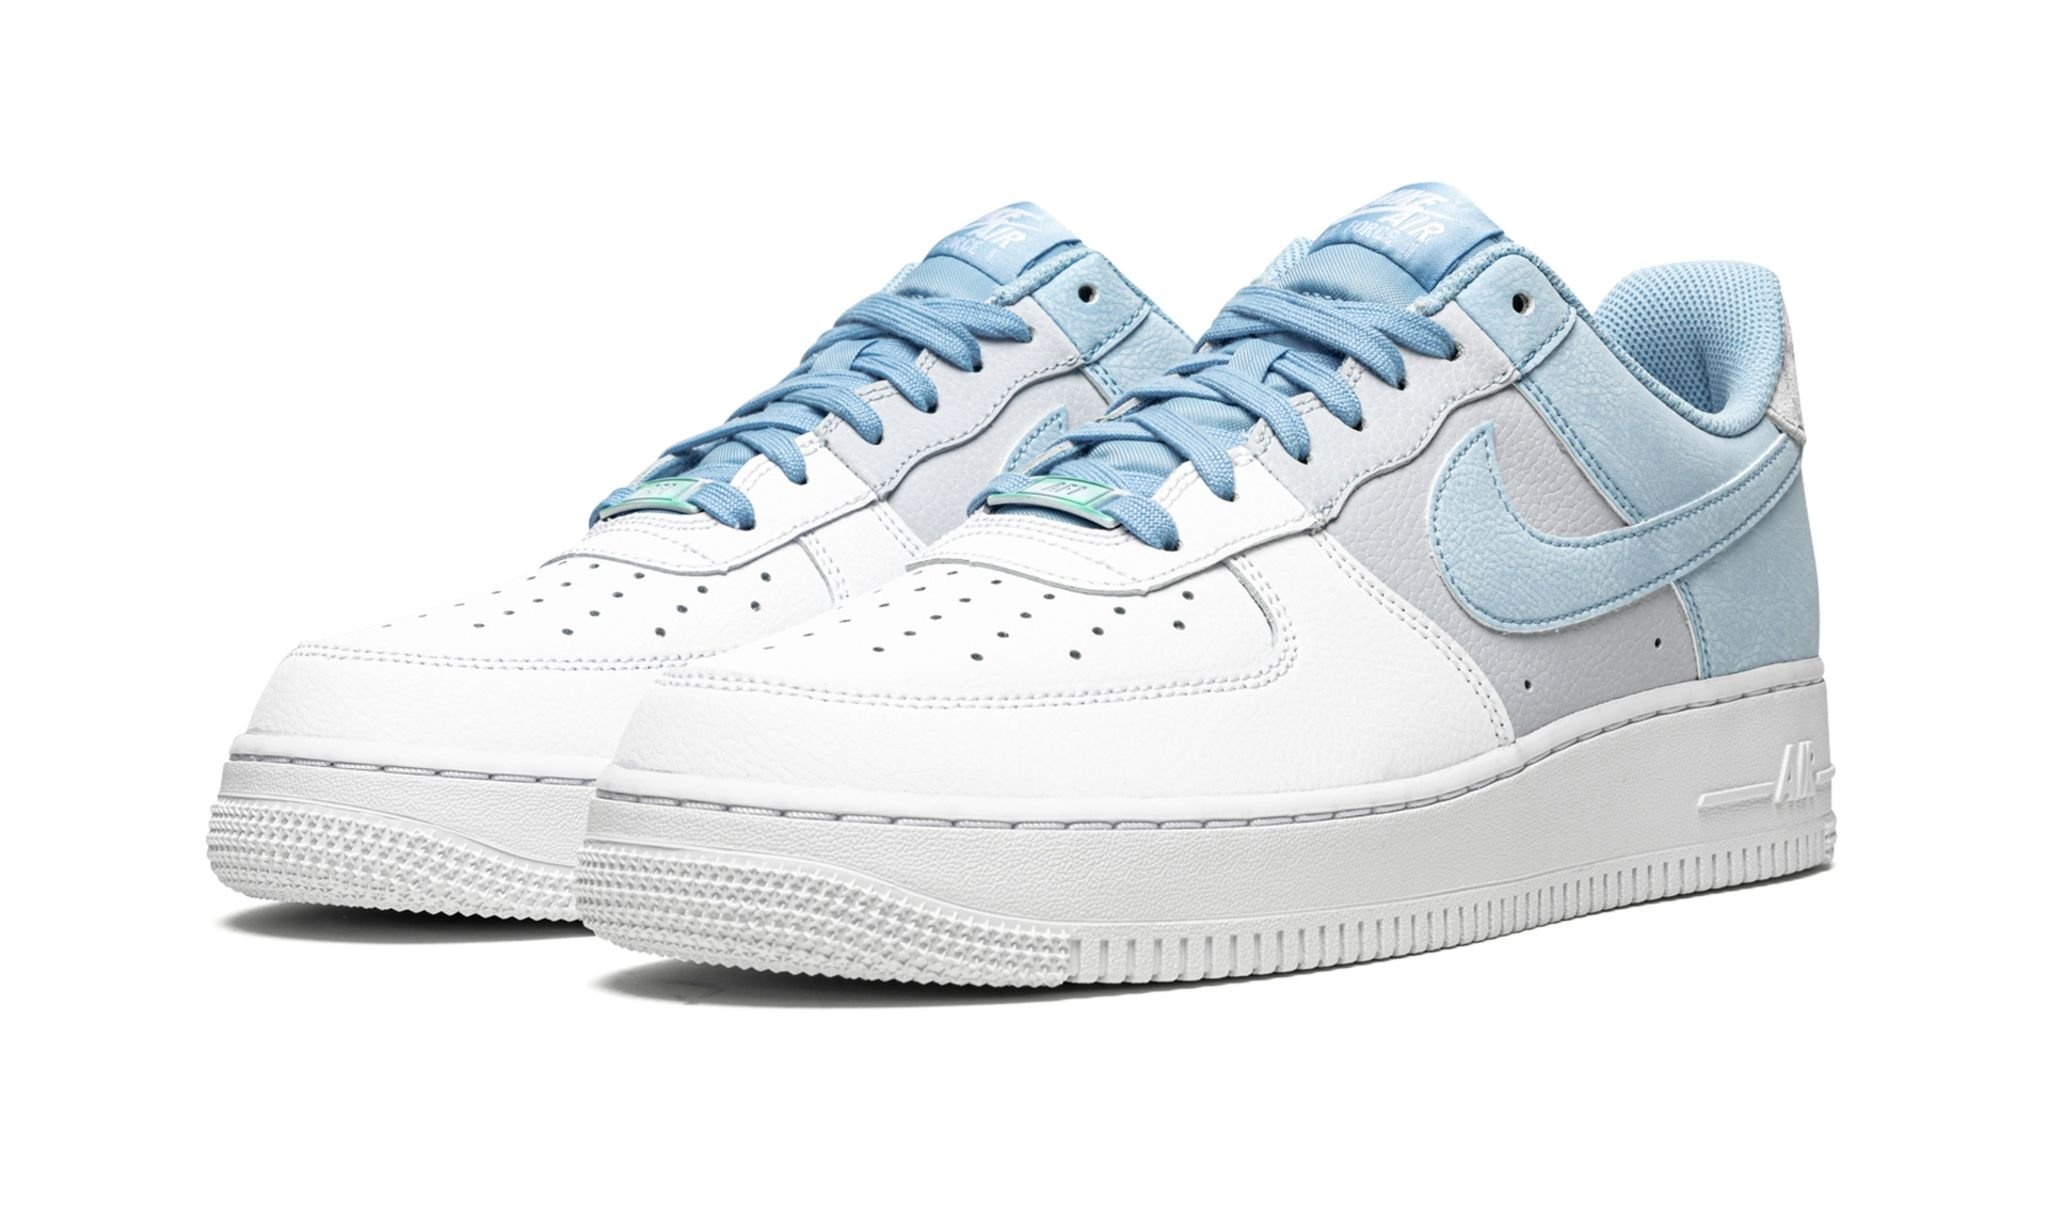 Air Force 1 '07 LV8 "Psychic Blue" - 2